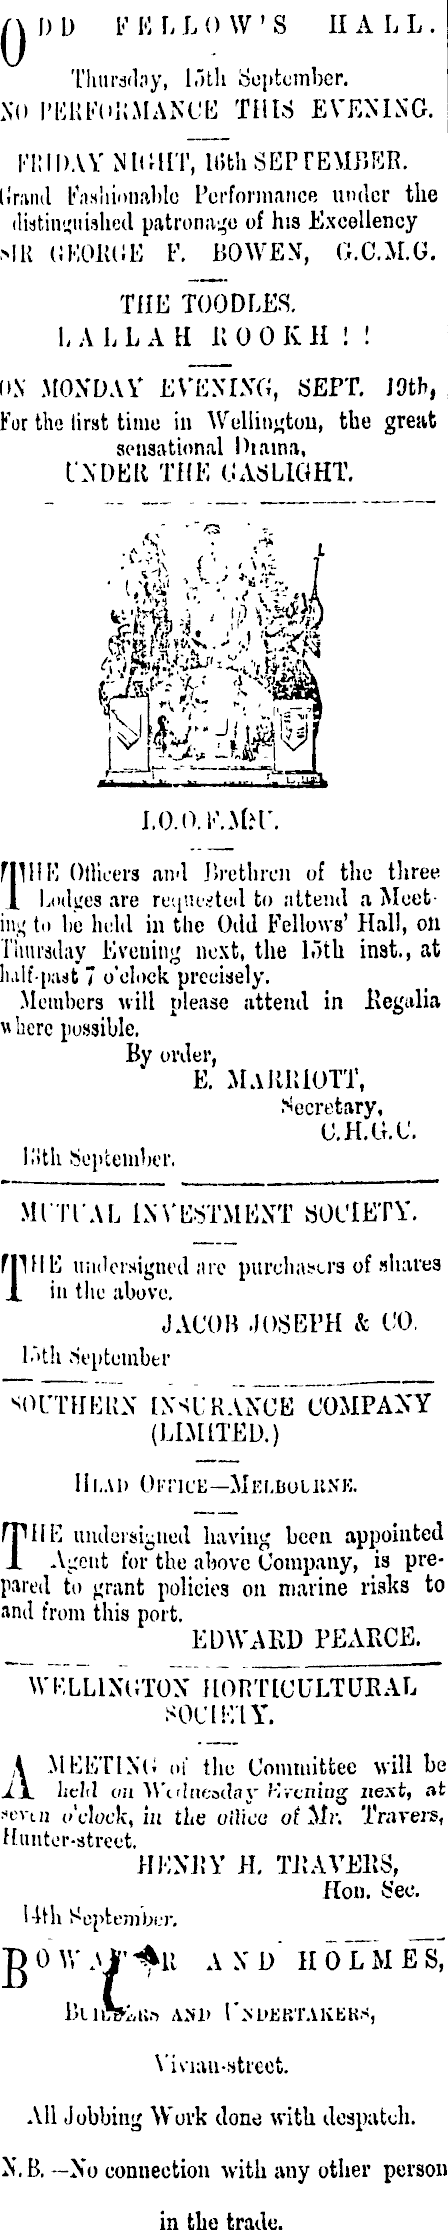 Papers Past Newspapers Evening Post 15 September 1870 Page 3 Advertisements Column 1